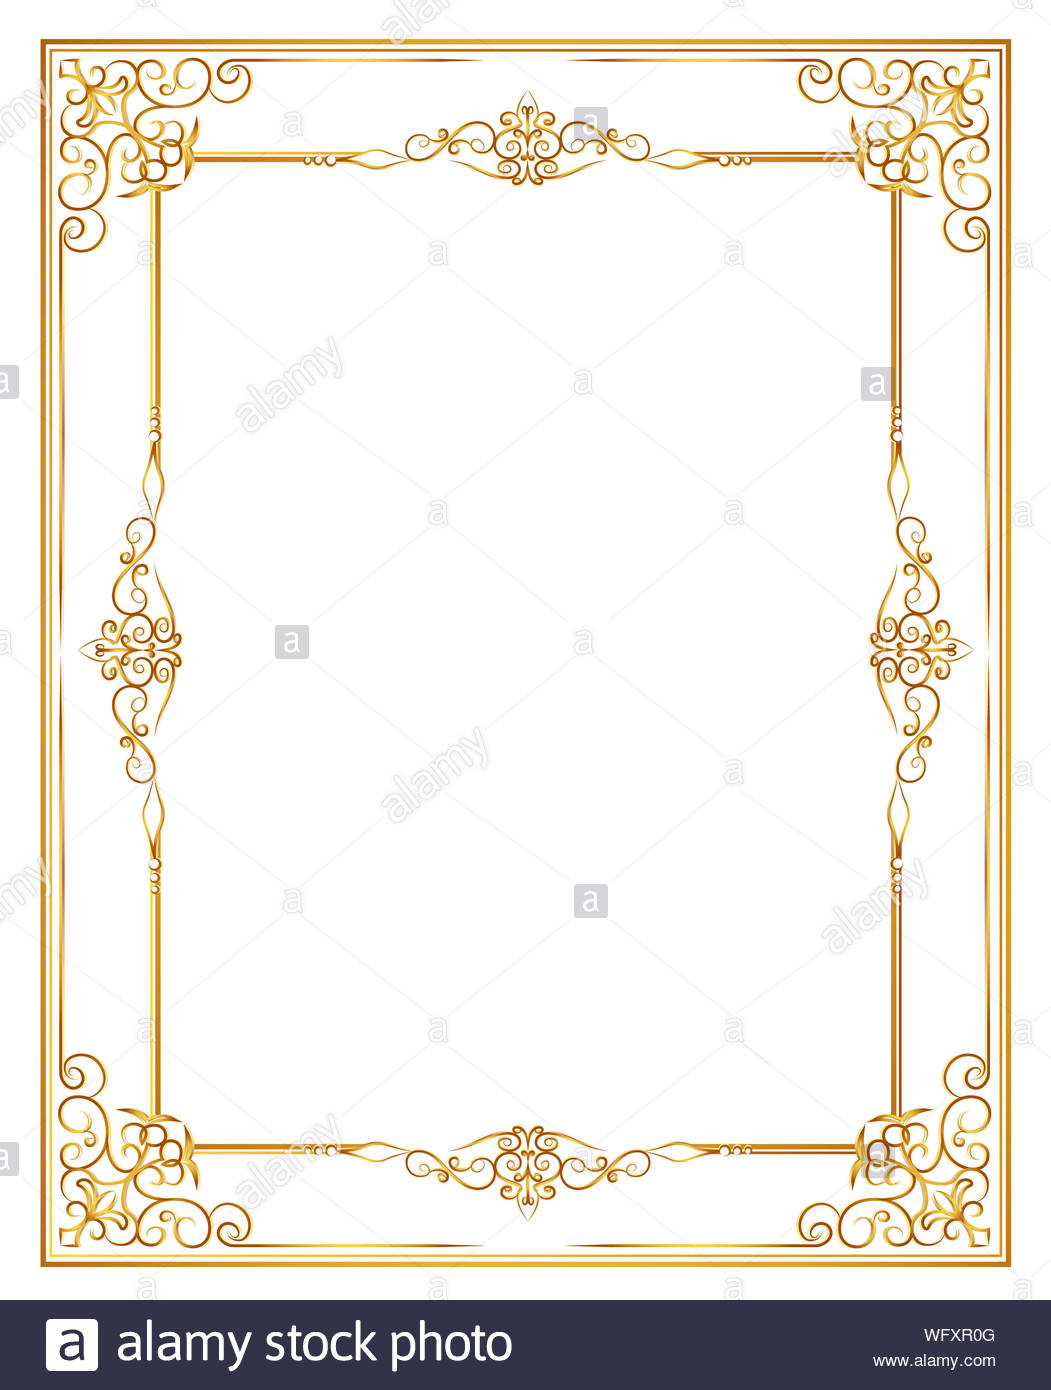 Close Up Of Invitation Card Over White Background Stock Photo